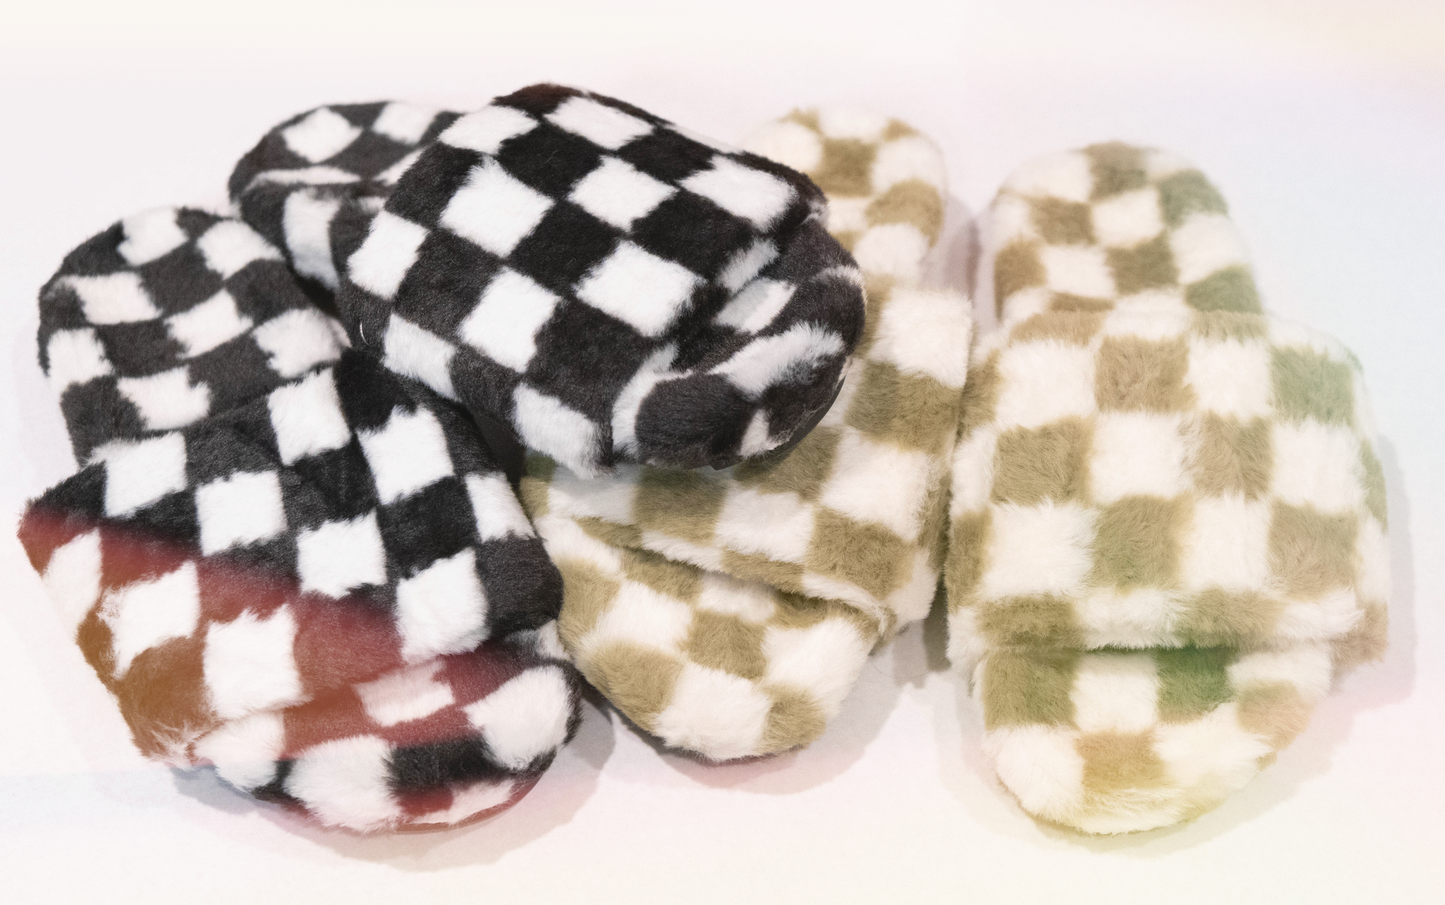 Checkered Fuzzy Slippers